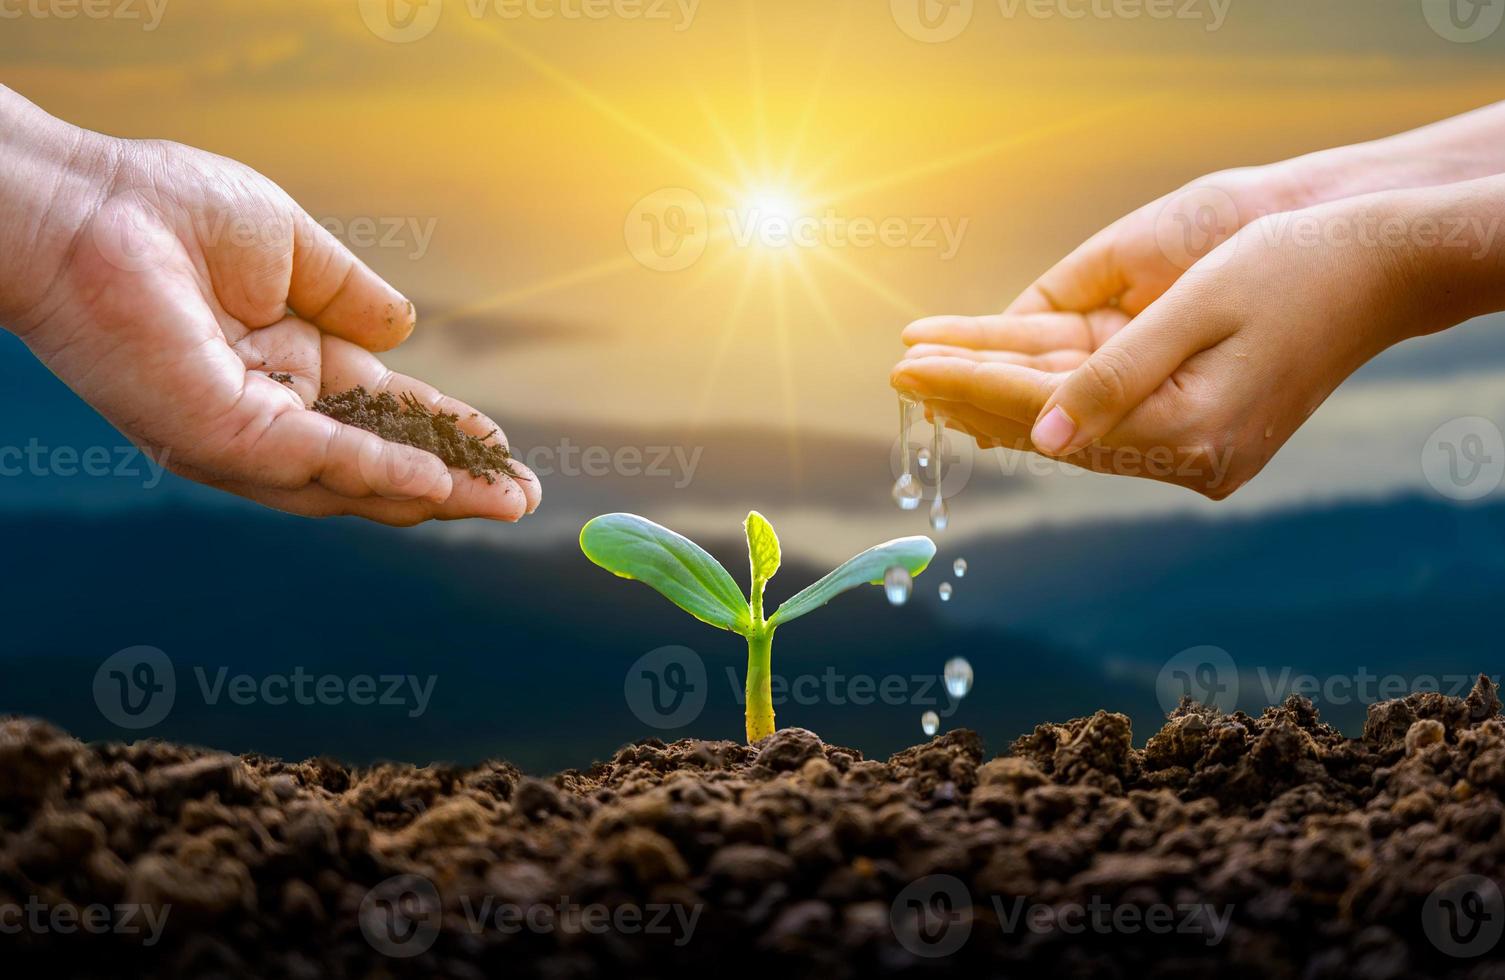 hand Watering plants tree mountain green Background Female hand holding tree on nature field grass Forest conservation concept photo